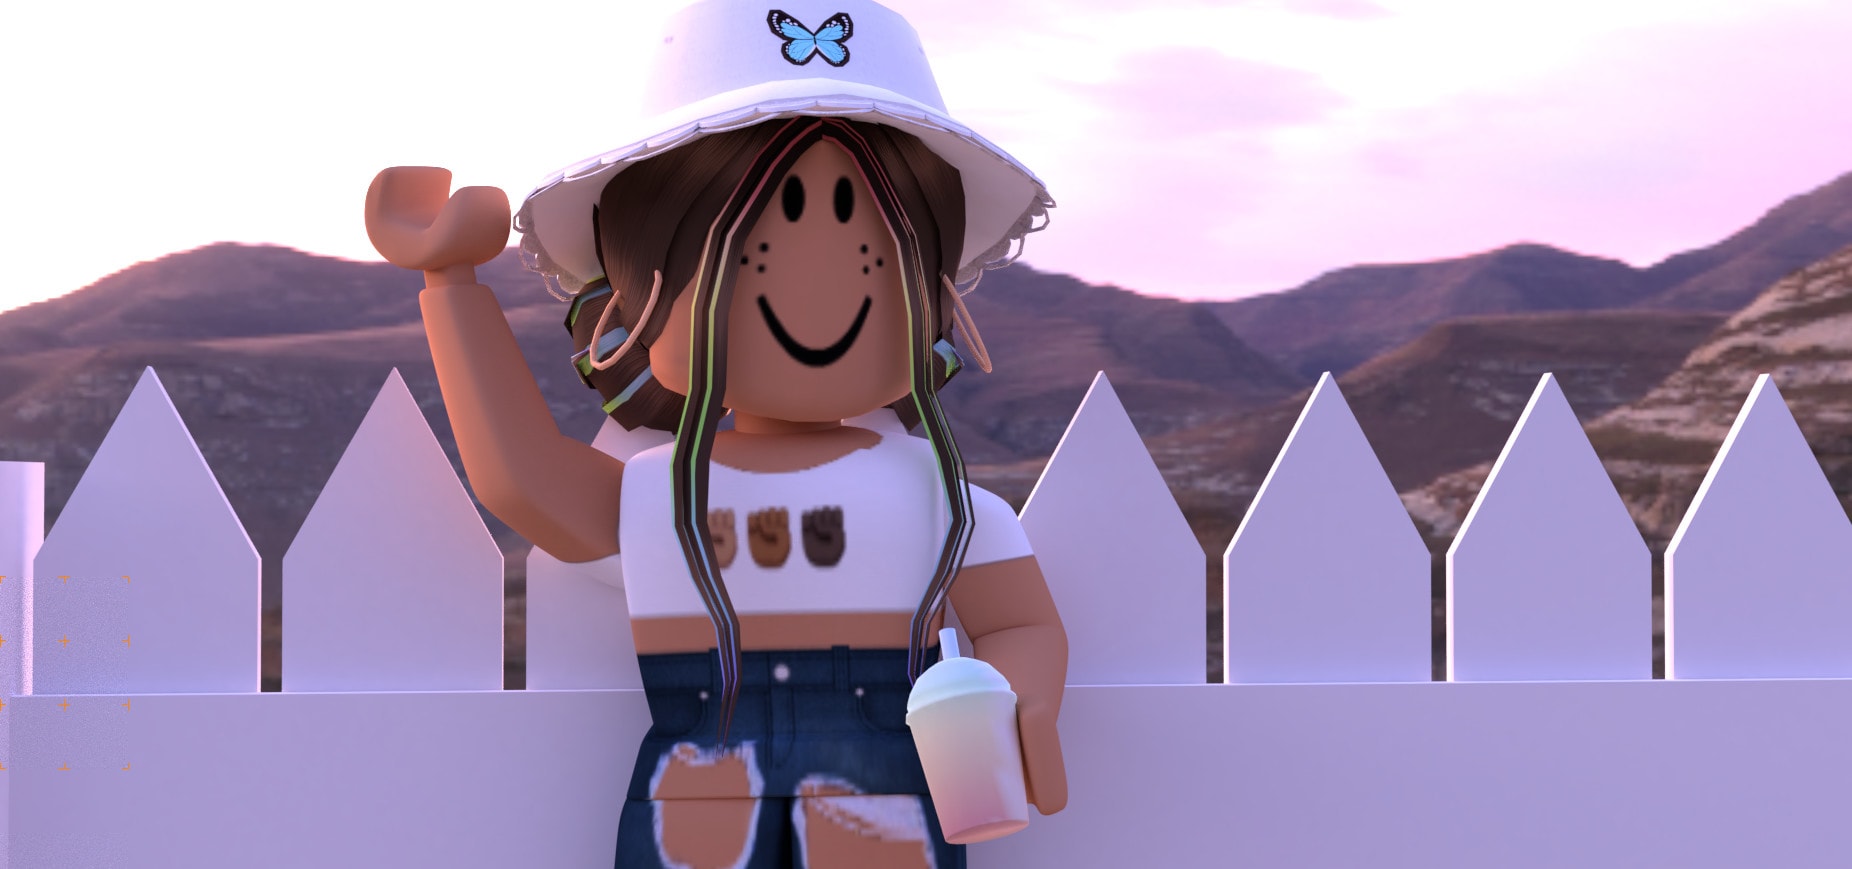 Make An Aesthetic Roblox Gfx By Mxylea - how to make roblox gfx in blender 2.8